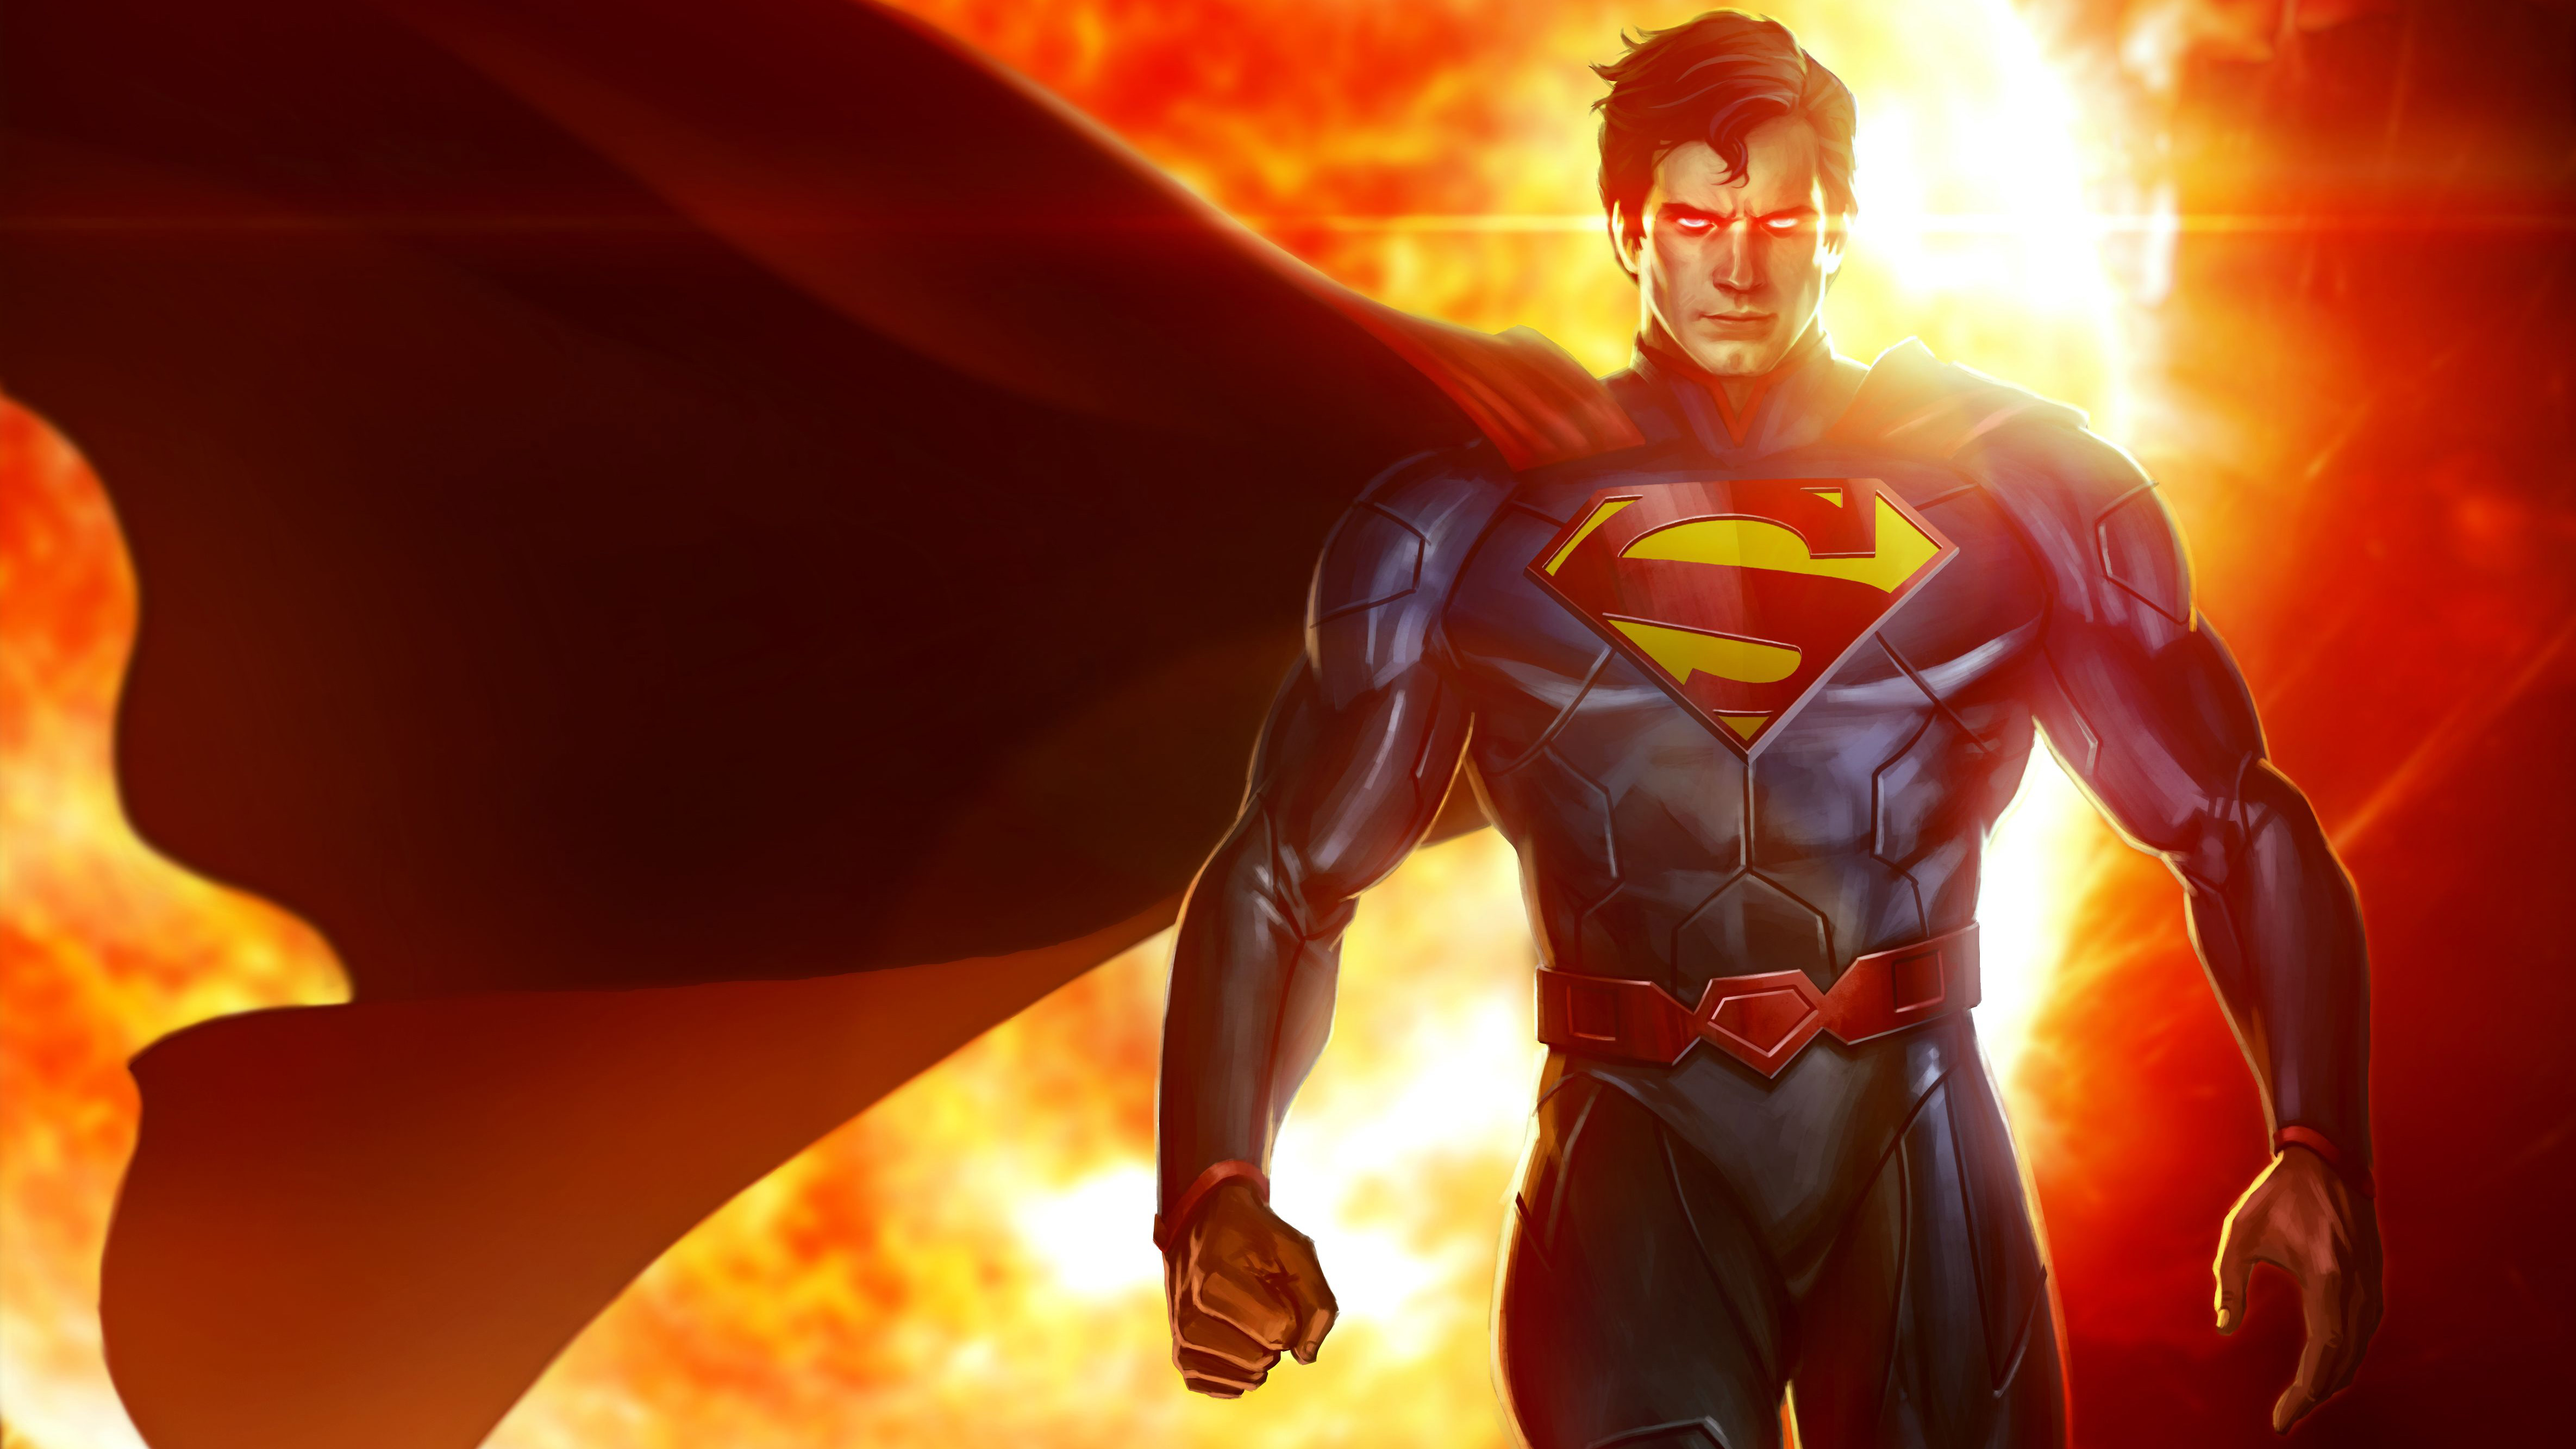 Page 2 of Superman 4K wallpapers for your desktop or mobile screen